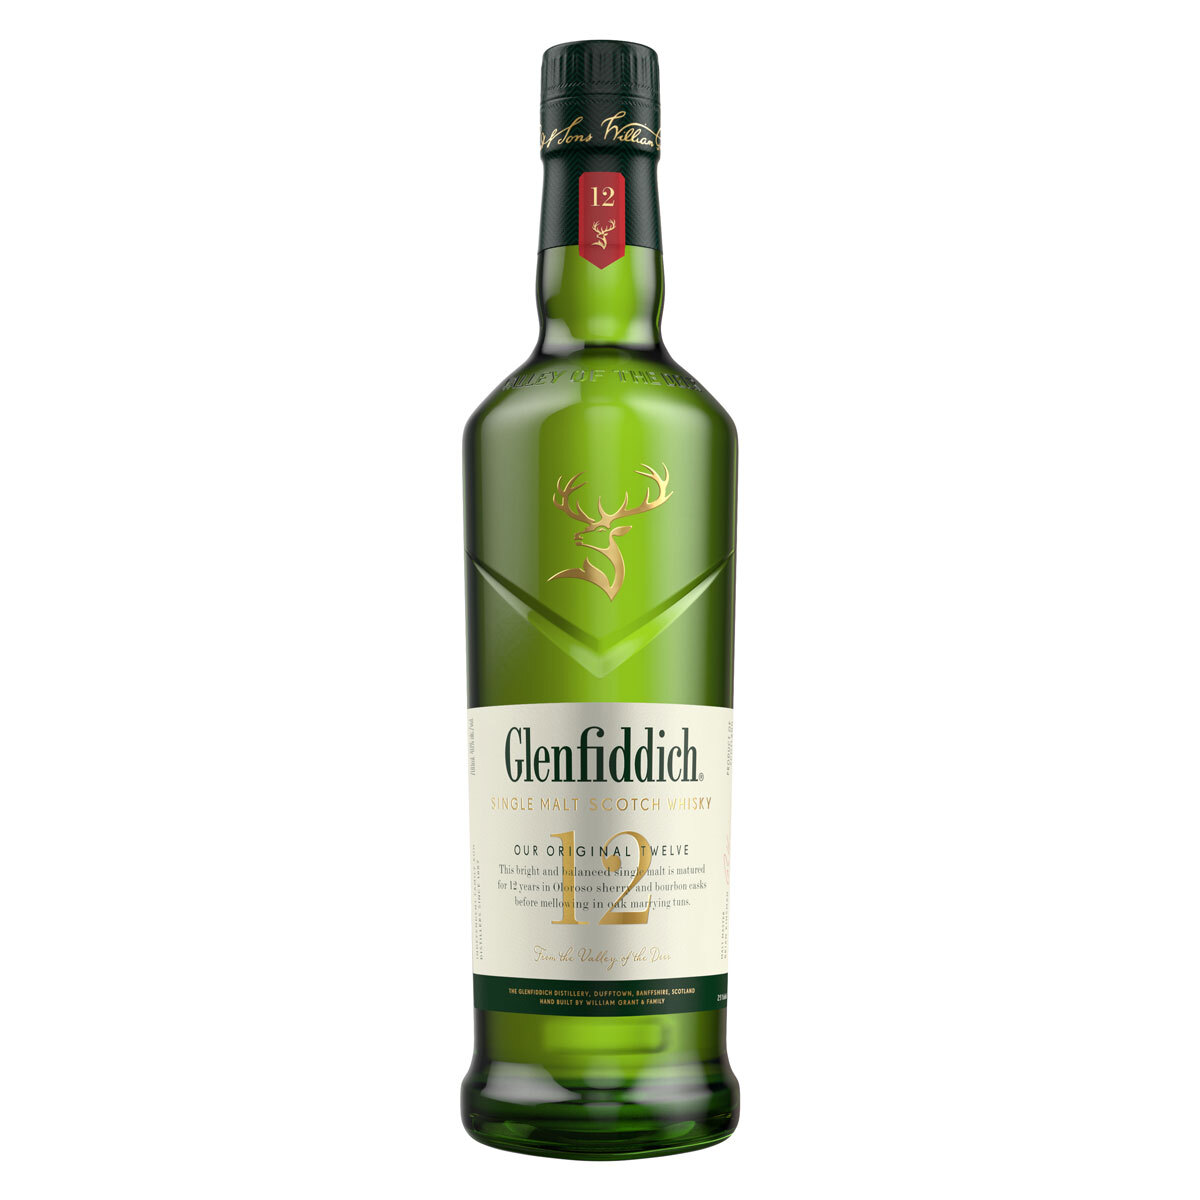 Cut out image of Glenfiddich bottle on white background